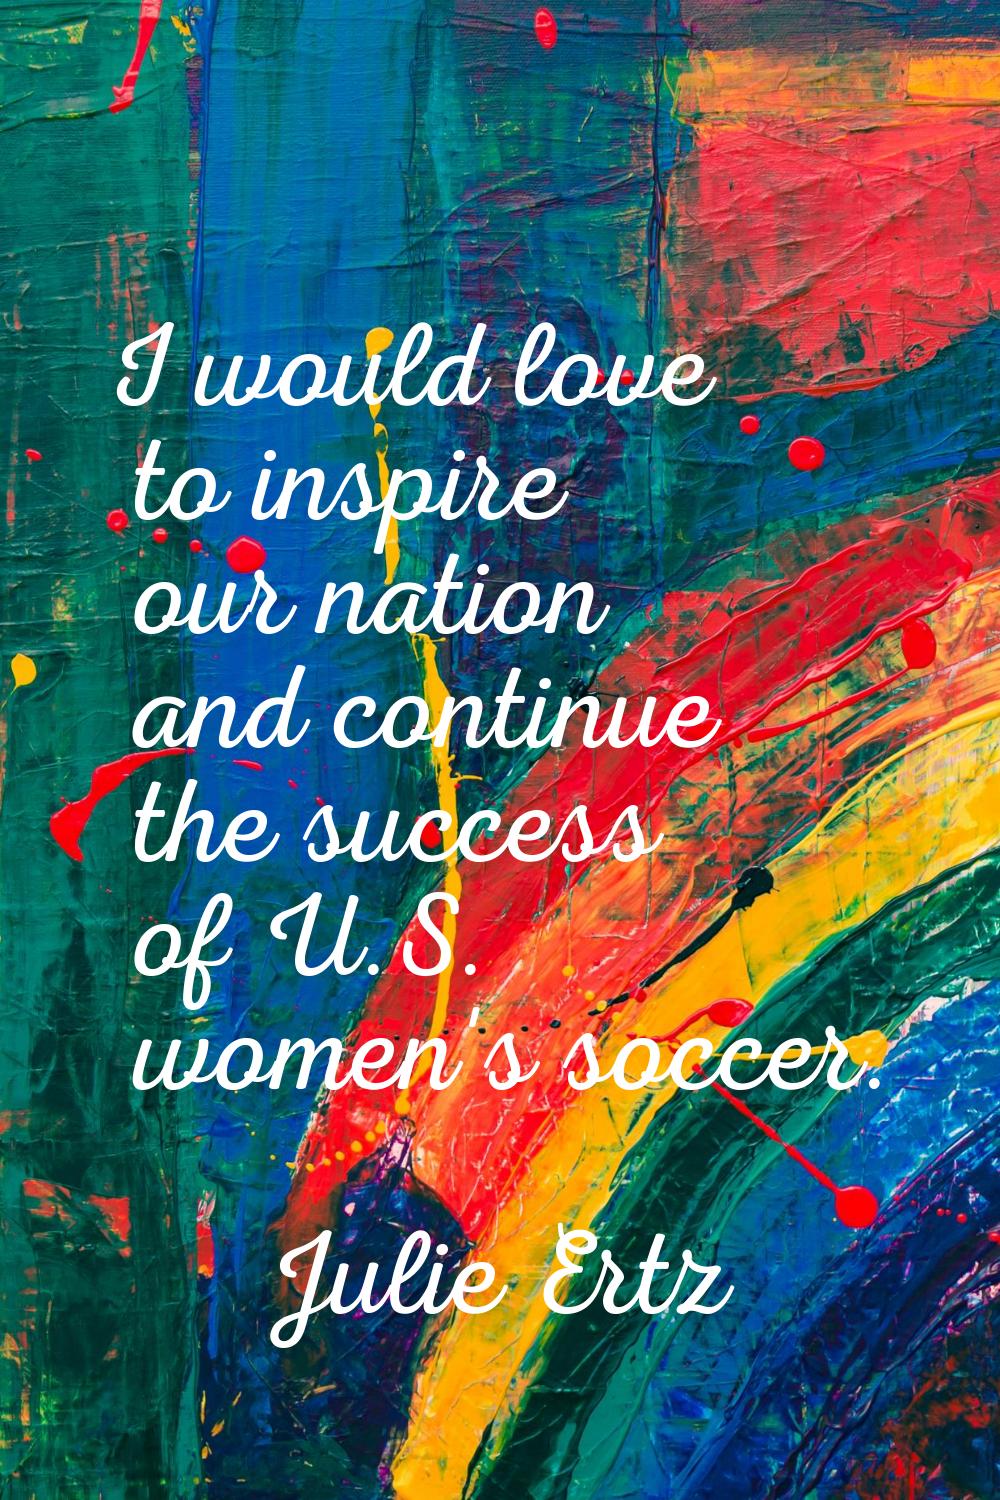 I would love to inspire our nation and continue the success of U.S. women's soccer.